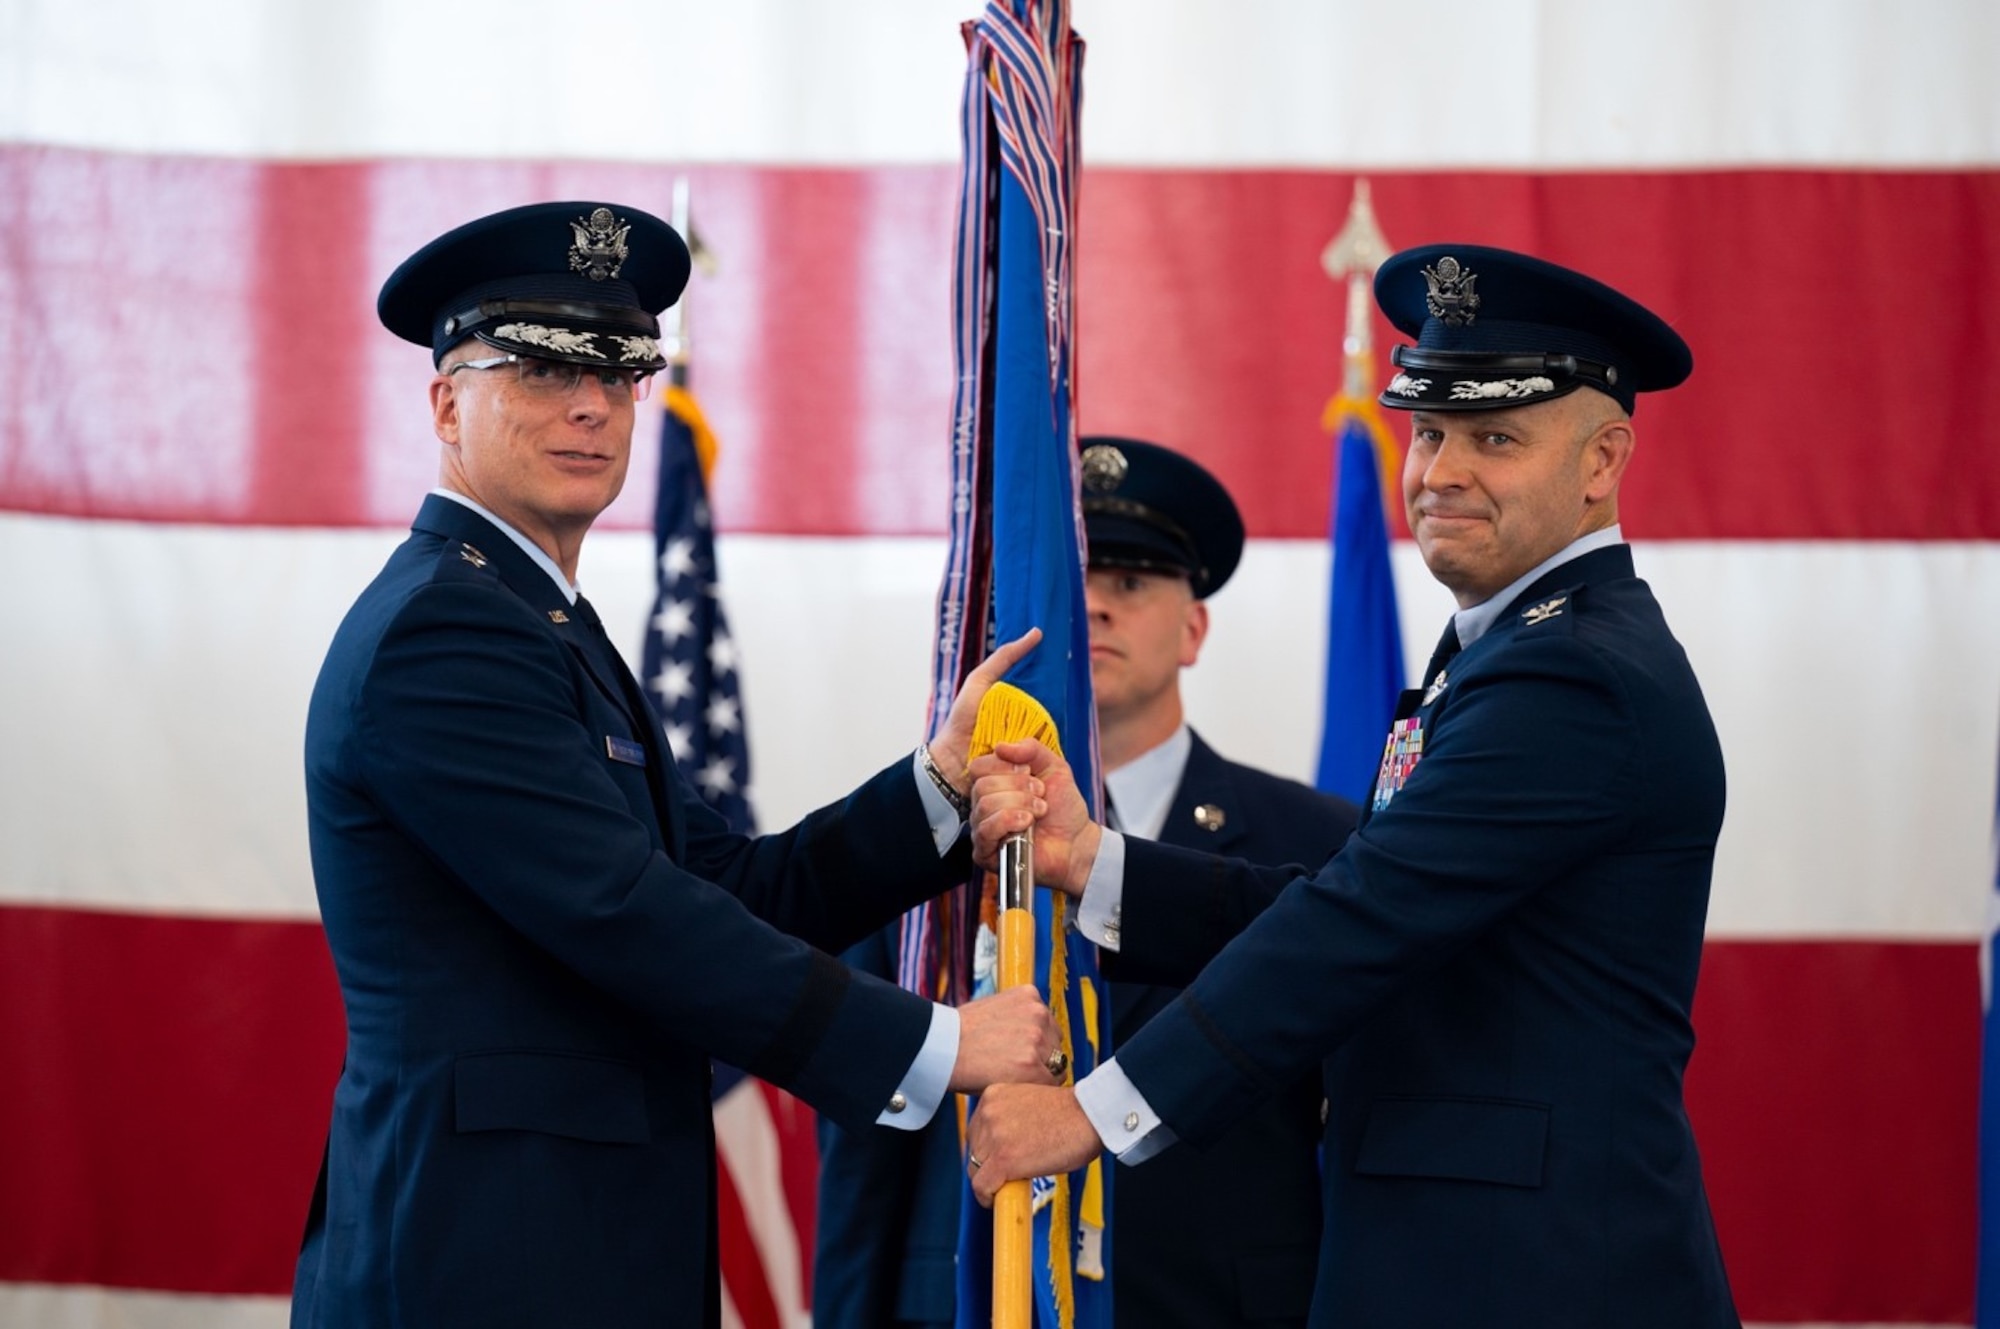 Maj. Gen. Mark E. Weatherington, 8th Air Force and Joint-Global Strike Operations Center commander, presents the guidon of the 28th Bomb Wing to Col. Joseph L. Sheffield, the new 28th BW commander, during a change of command ceremony at Ellsworth Air Force Base, S.D., June 18, 2021.